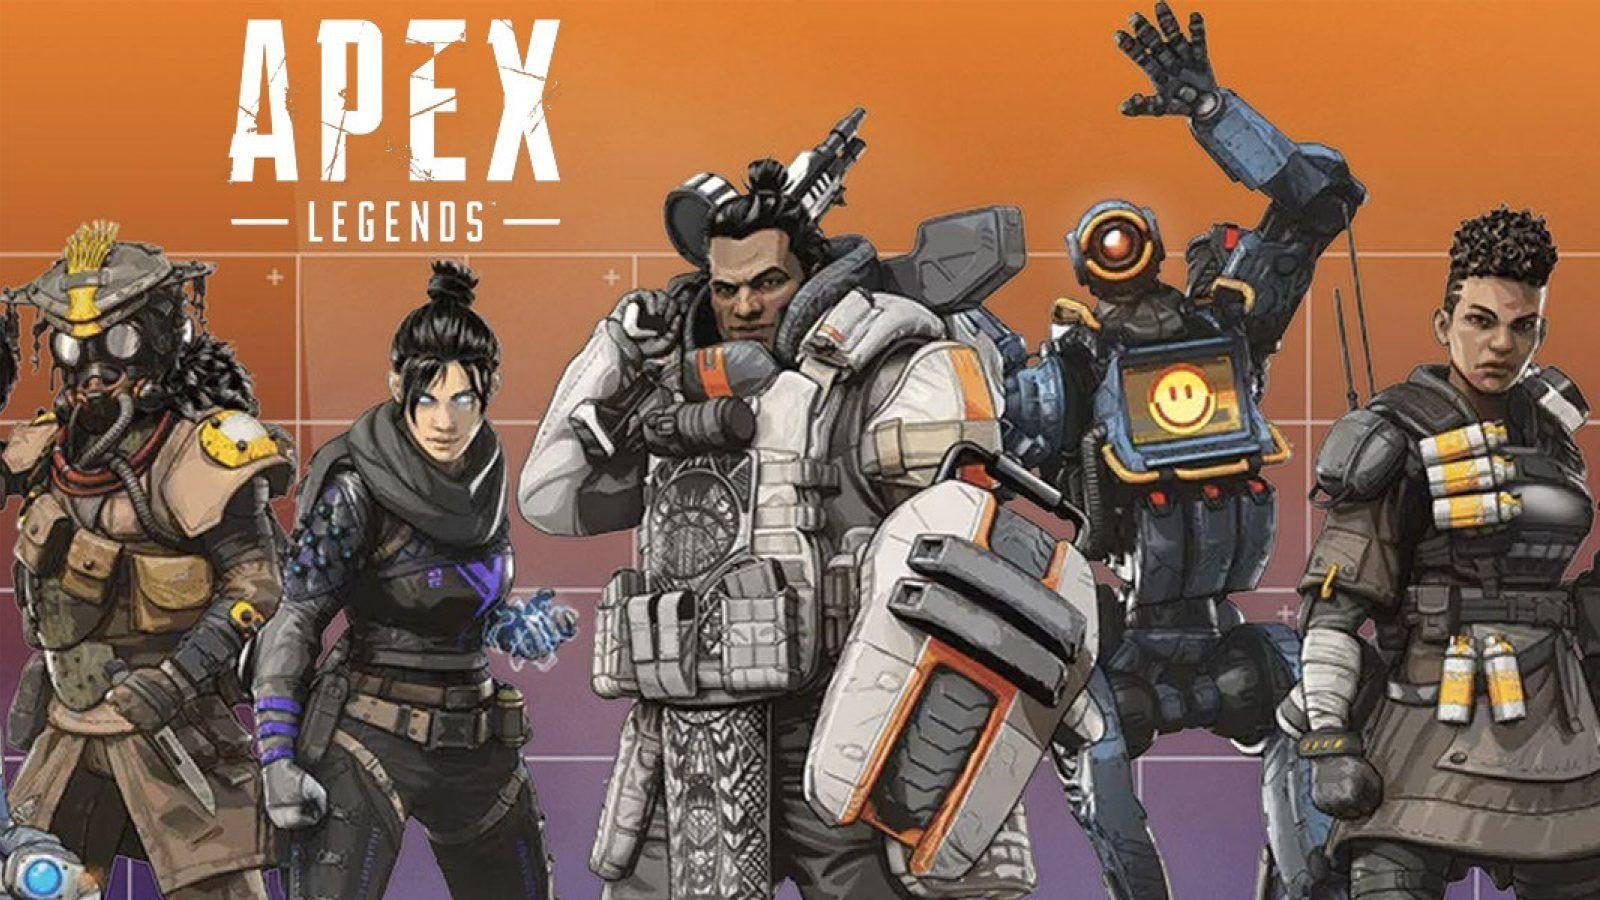 Hysterical Apex Legends Season 2 parody trailer has fans in stitches